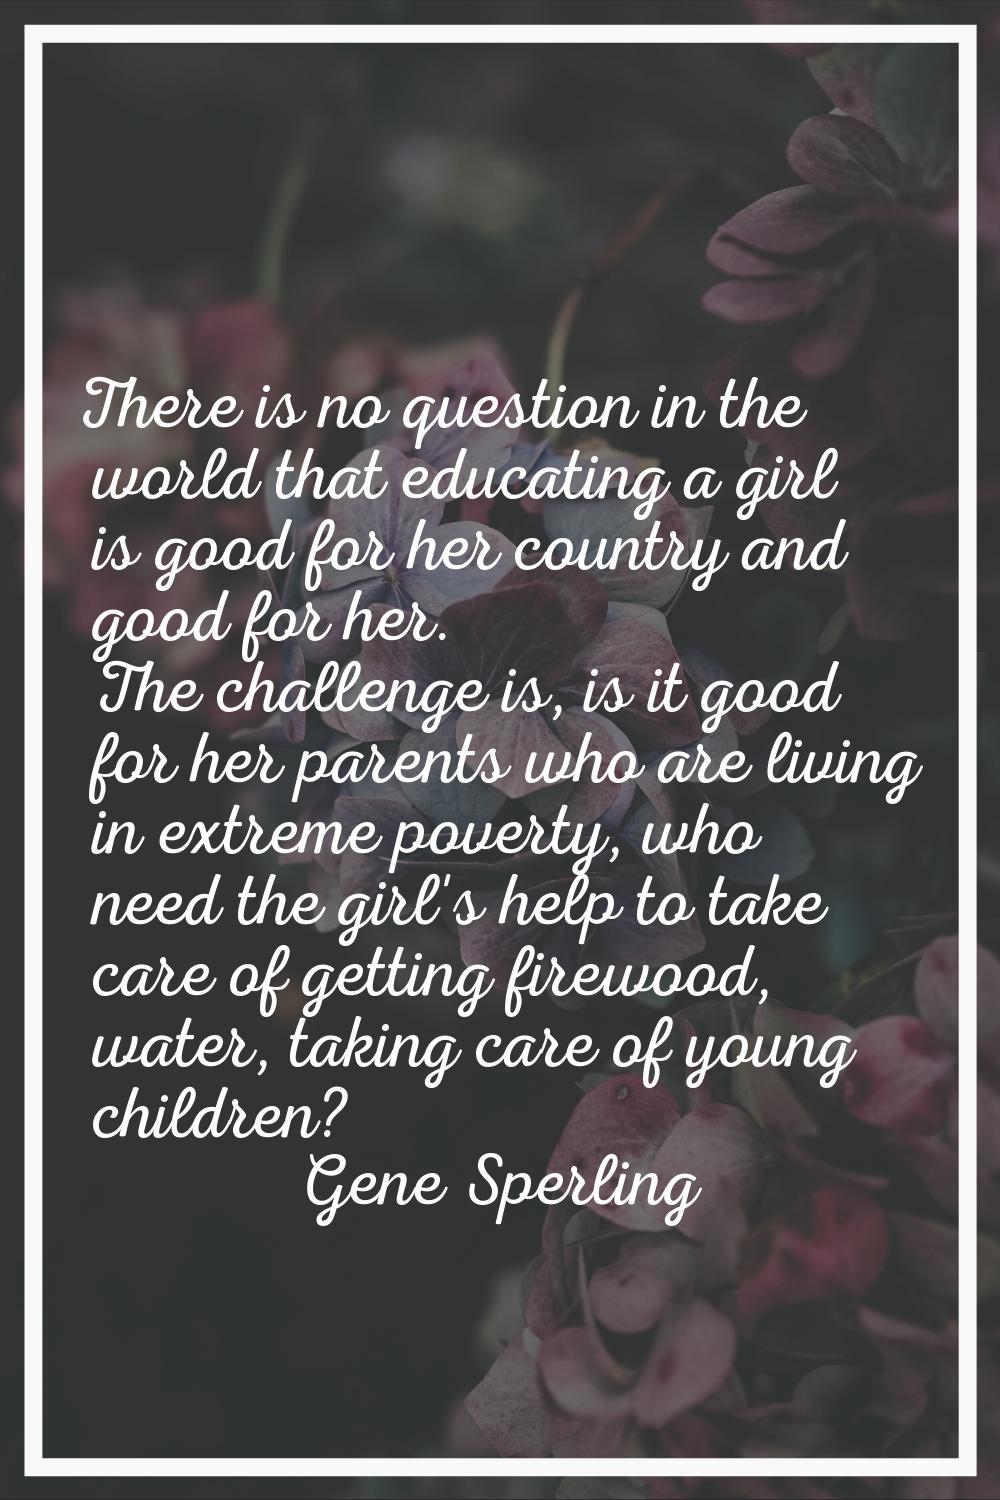 There is no question in the world that educating a girl is good for her country and good for her. T